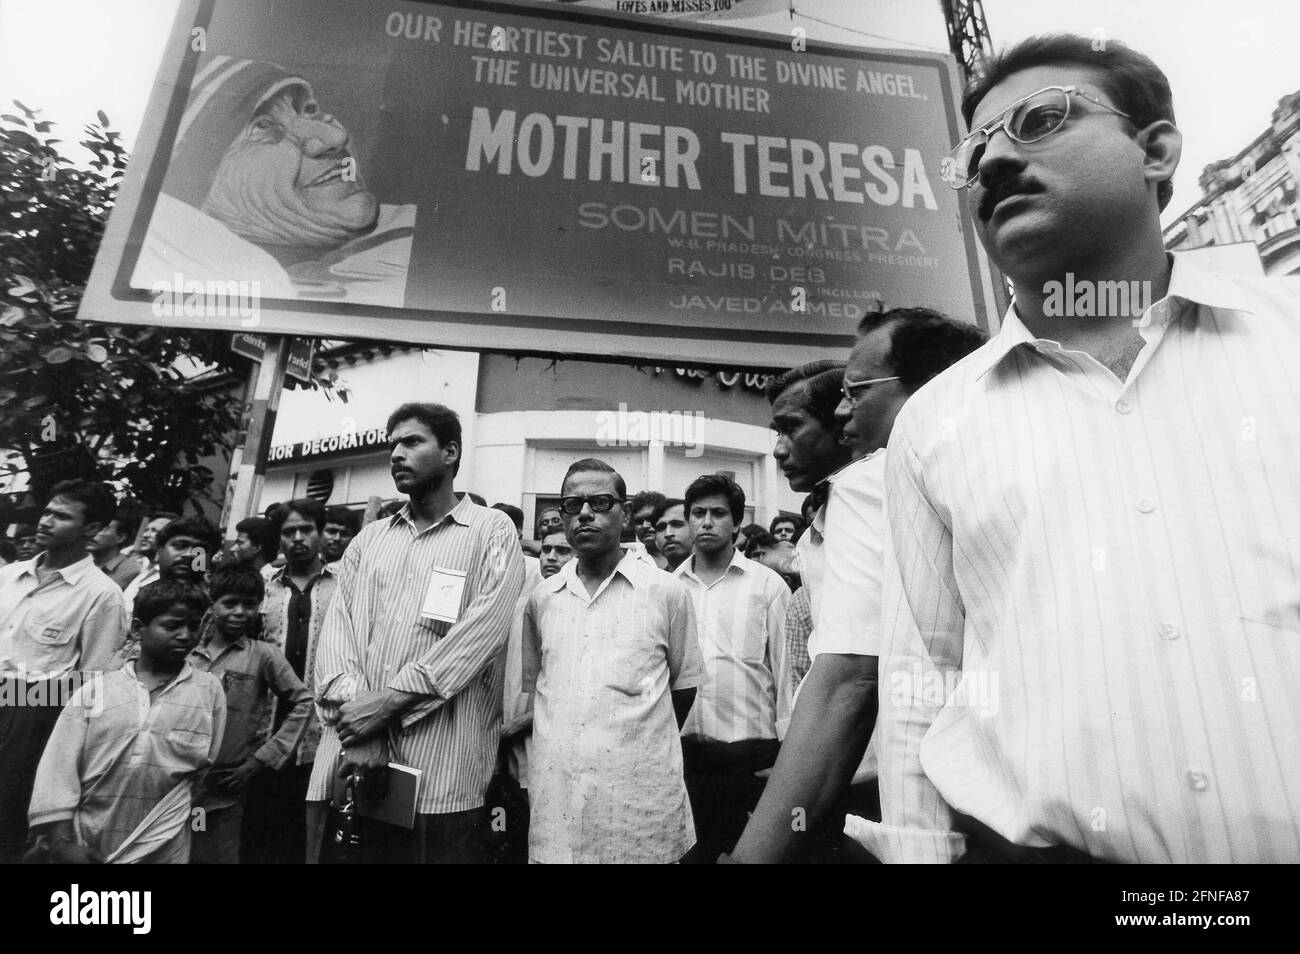 Date of recording: 12.09.1997 Indians mourn Mother Teresa. [automated translation] Stock Photo